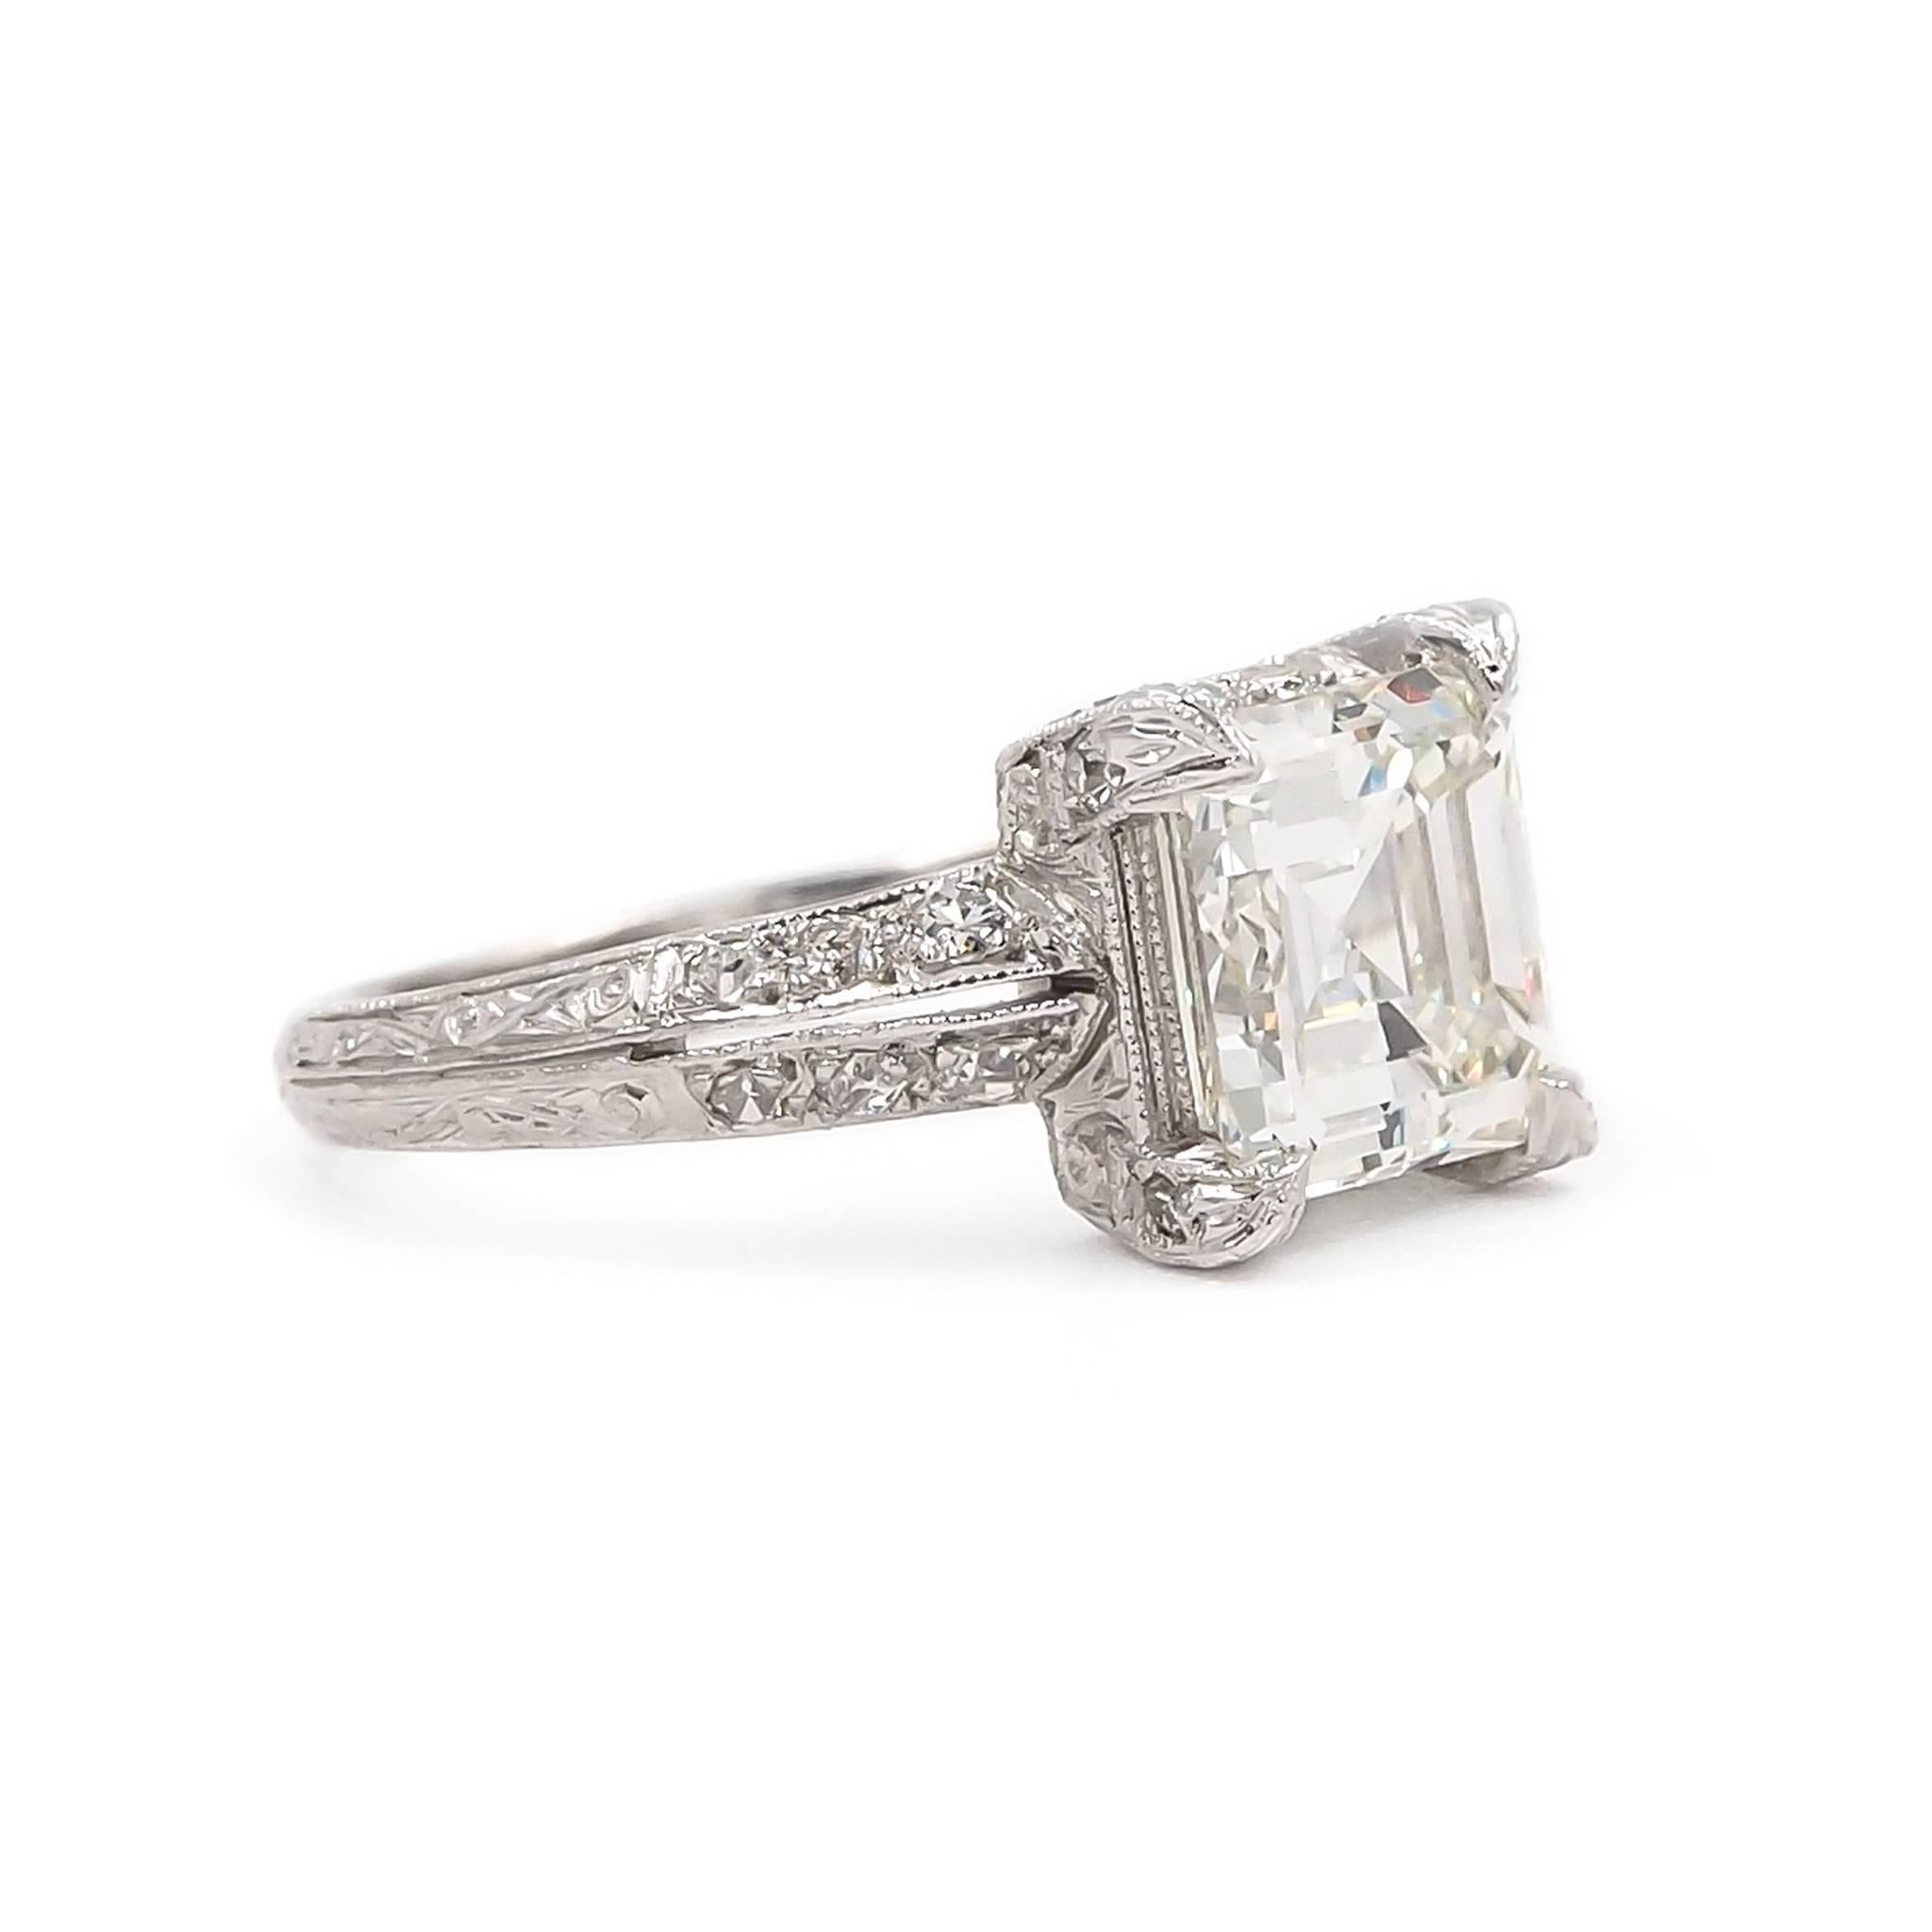 
Beautiful example of Edwardian craftsmanship. Composed of platinum with a pierced open work & fiiigree design. Featuring a center stone 2.04 Carat Square Emerald Cut Diamond. Accented with 12 Pave Set Round Cut diamonds weighing 0.26 Ct. in total.